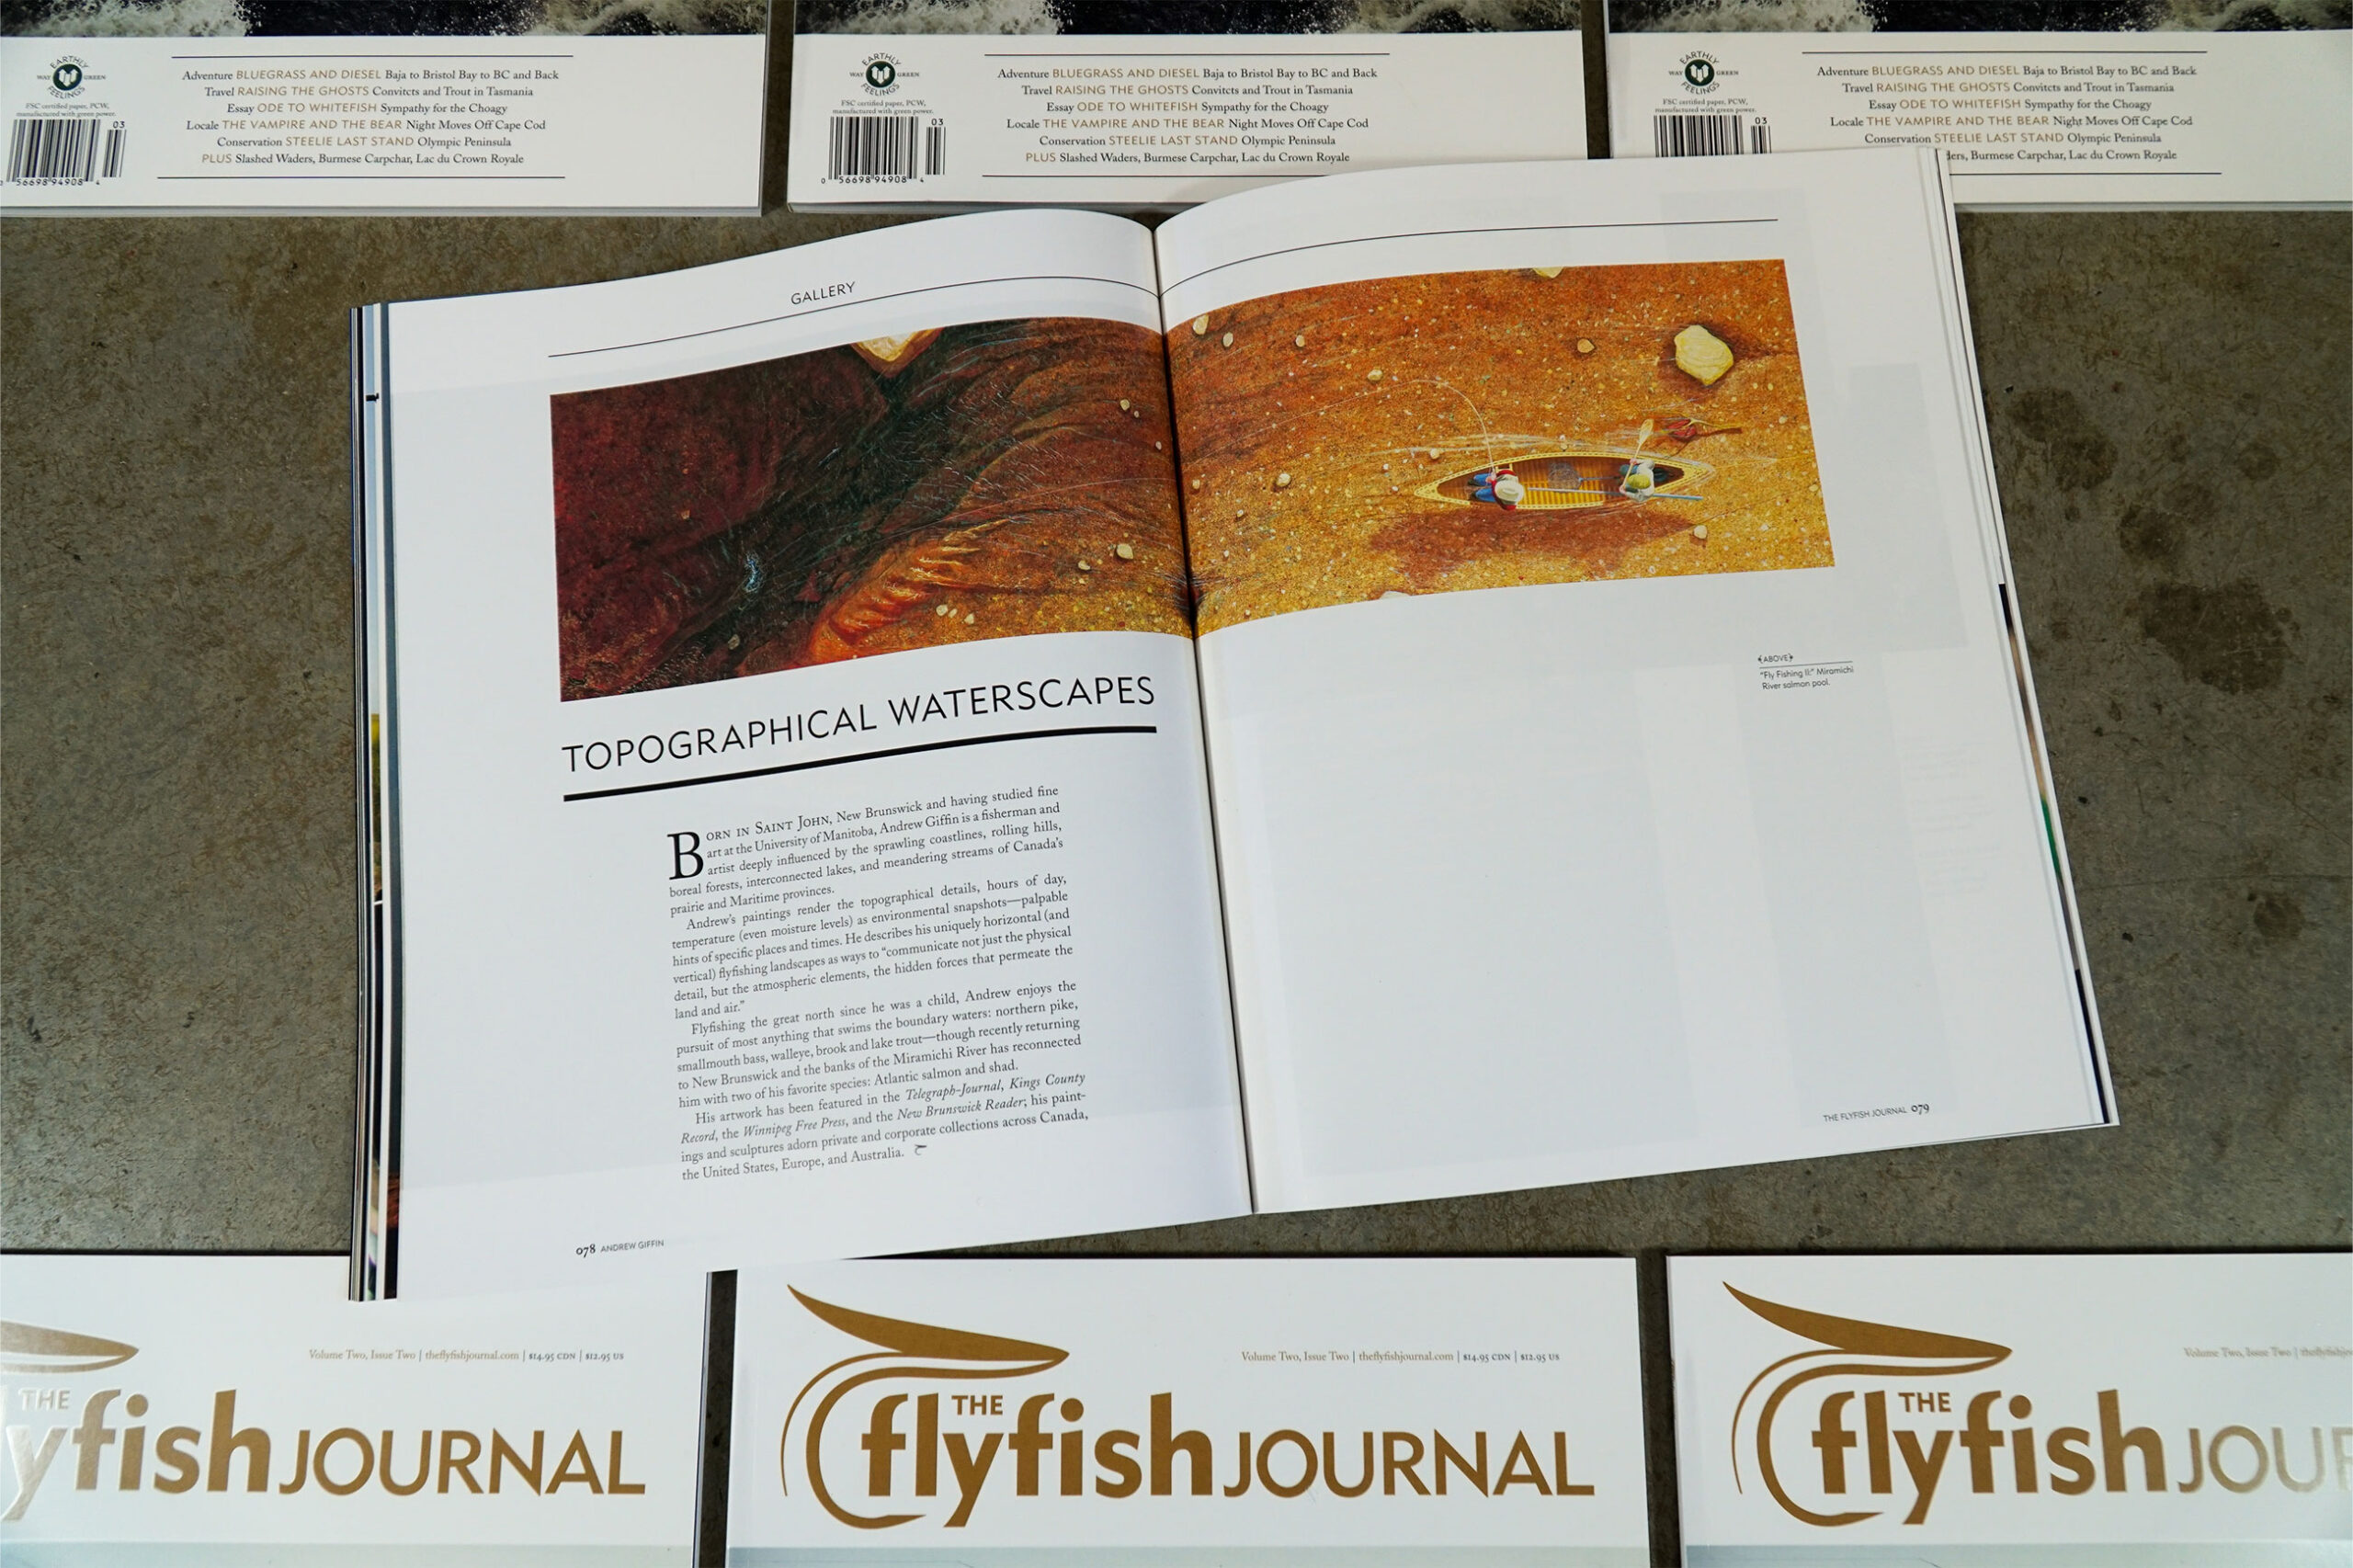 The Flyfish Journal Volume 2 Issue 2 Feature Topograhical Waterscapes